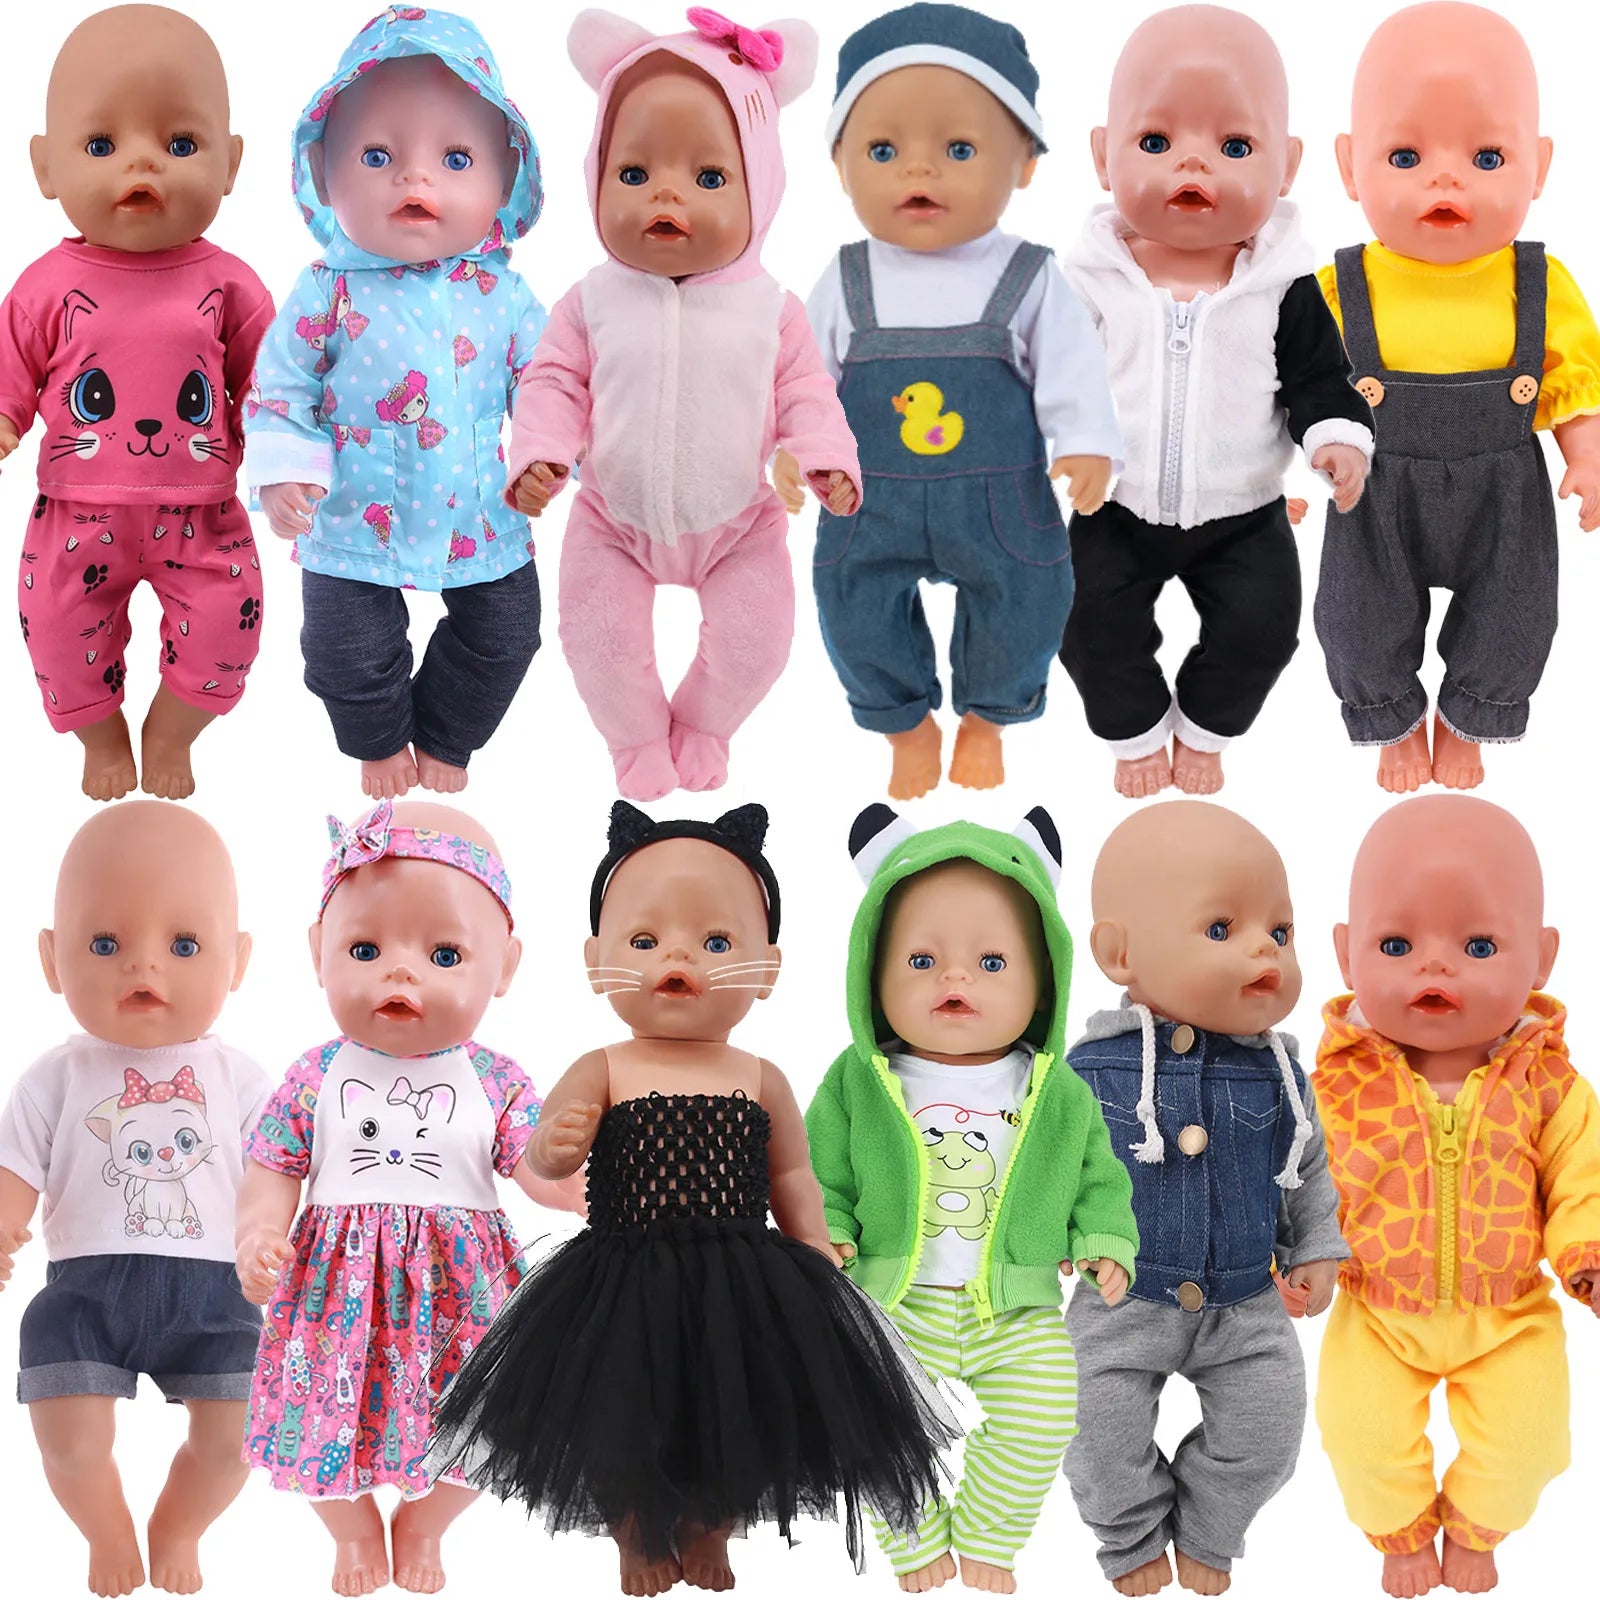 Doll Baby Clothes Kittys Kitten Cat Cartoon Dress Shoes Fit 18 Inch American&43cm Reborn New Born Baby Doll OG Girl`s Toy Doll